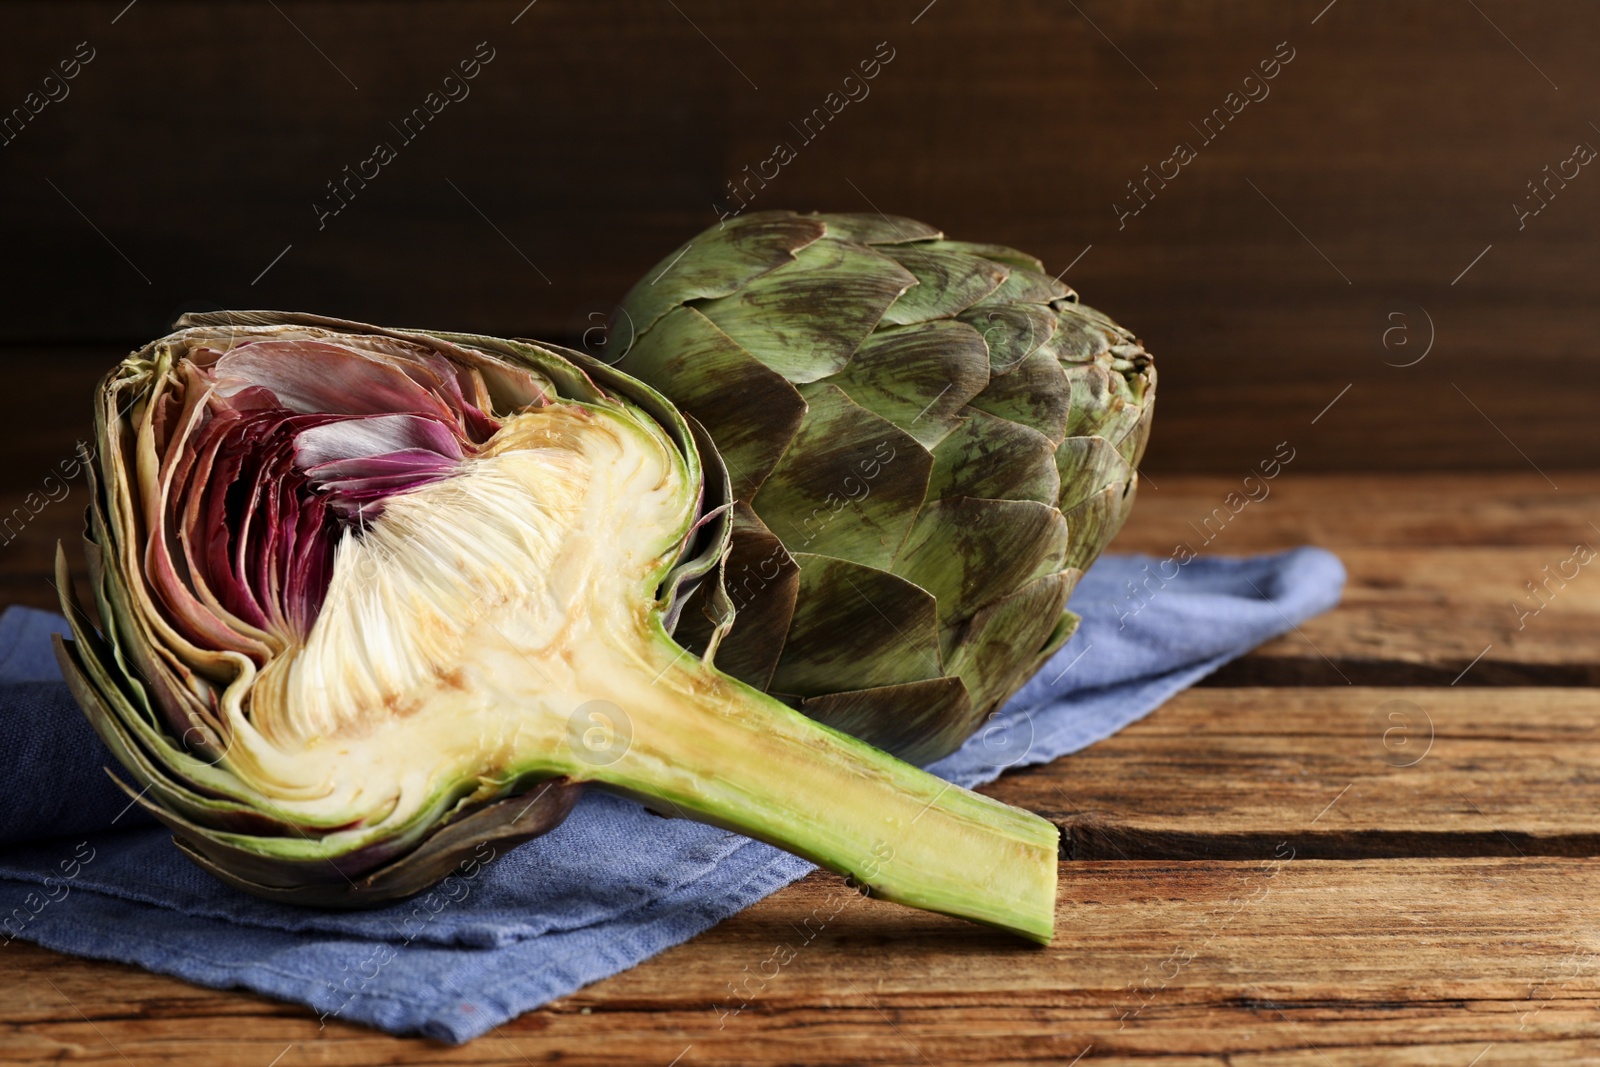 Photo of Cut and whole fresh raw artichokes on wooden table